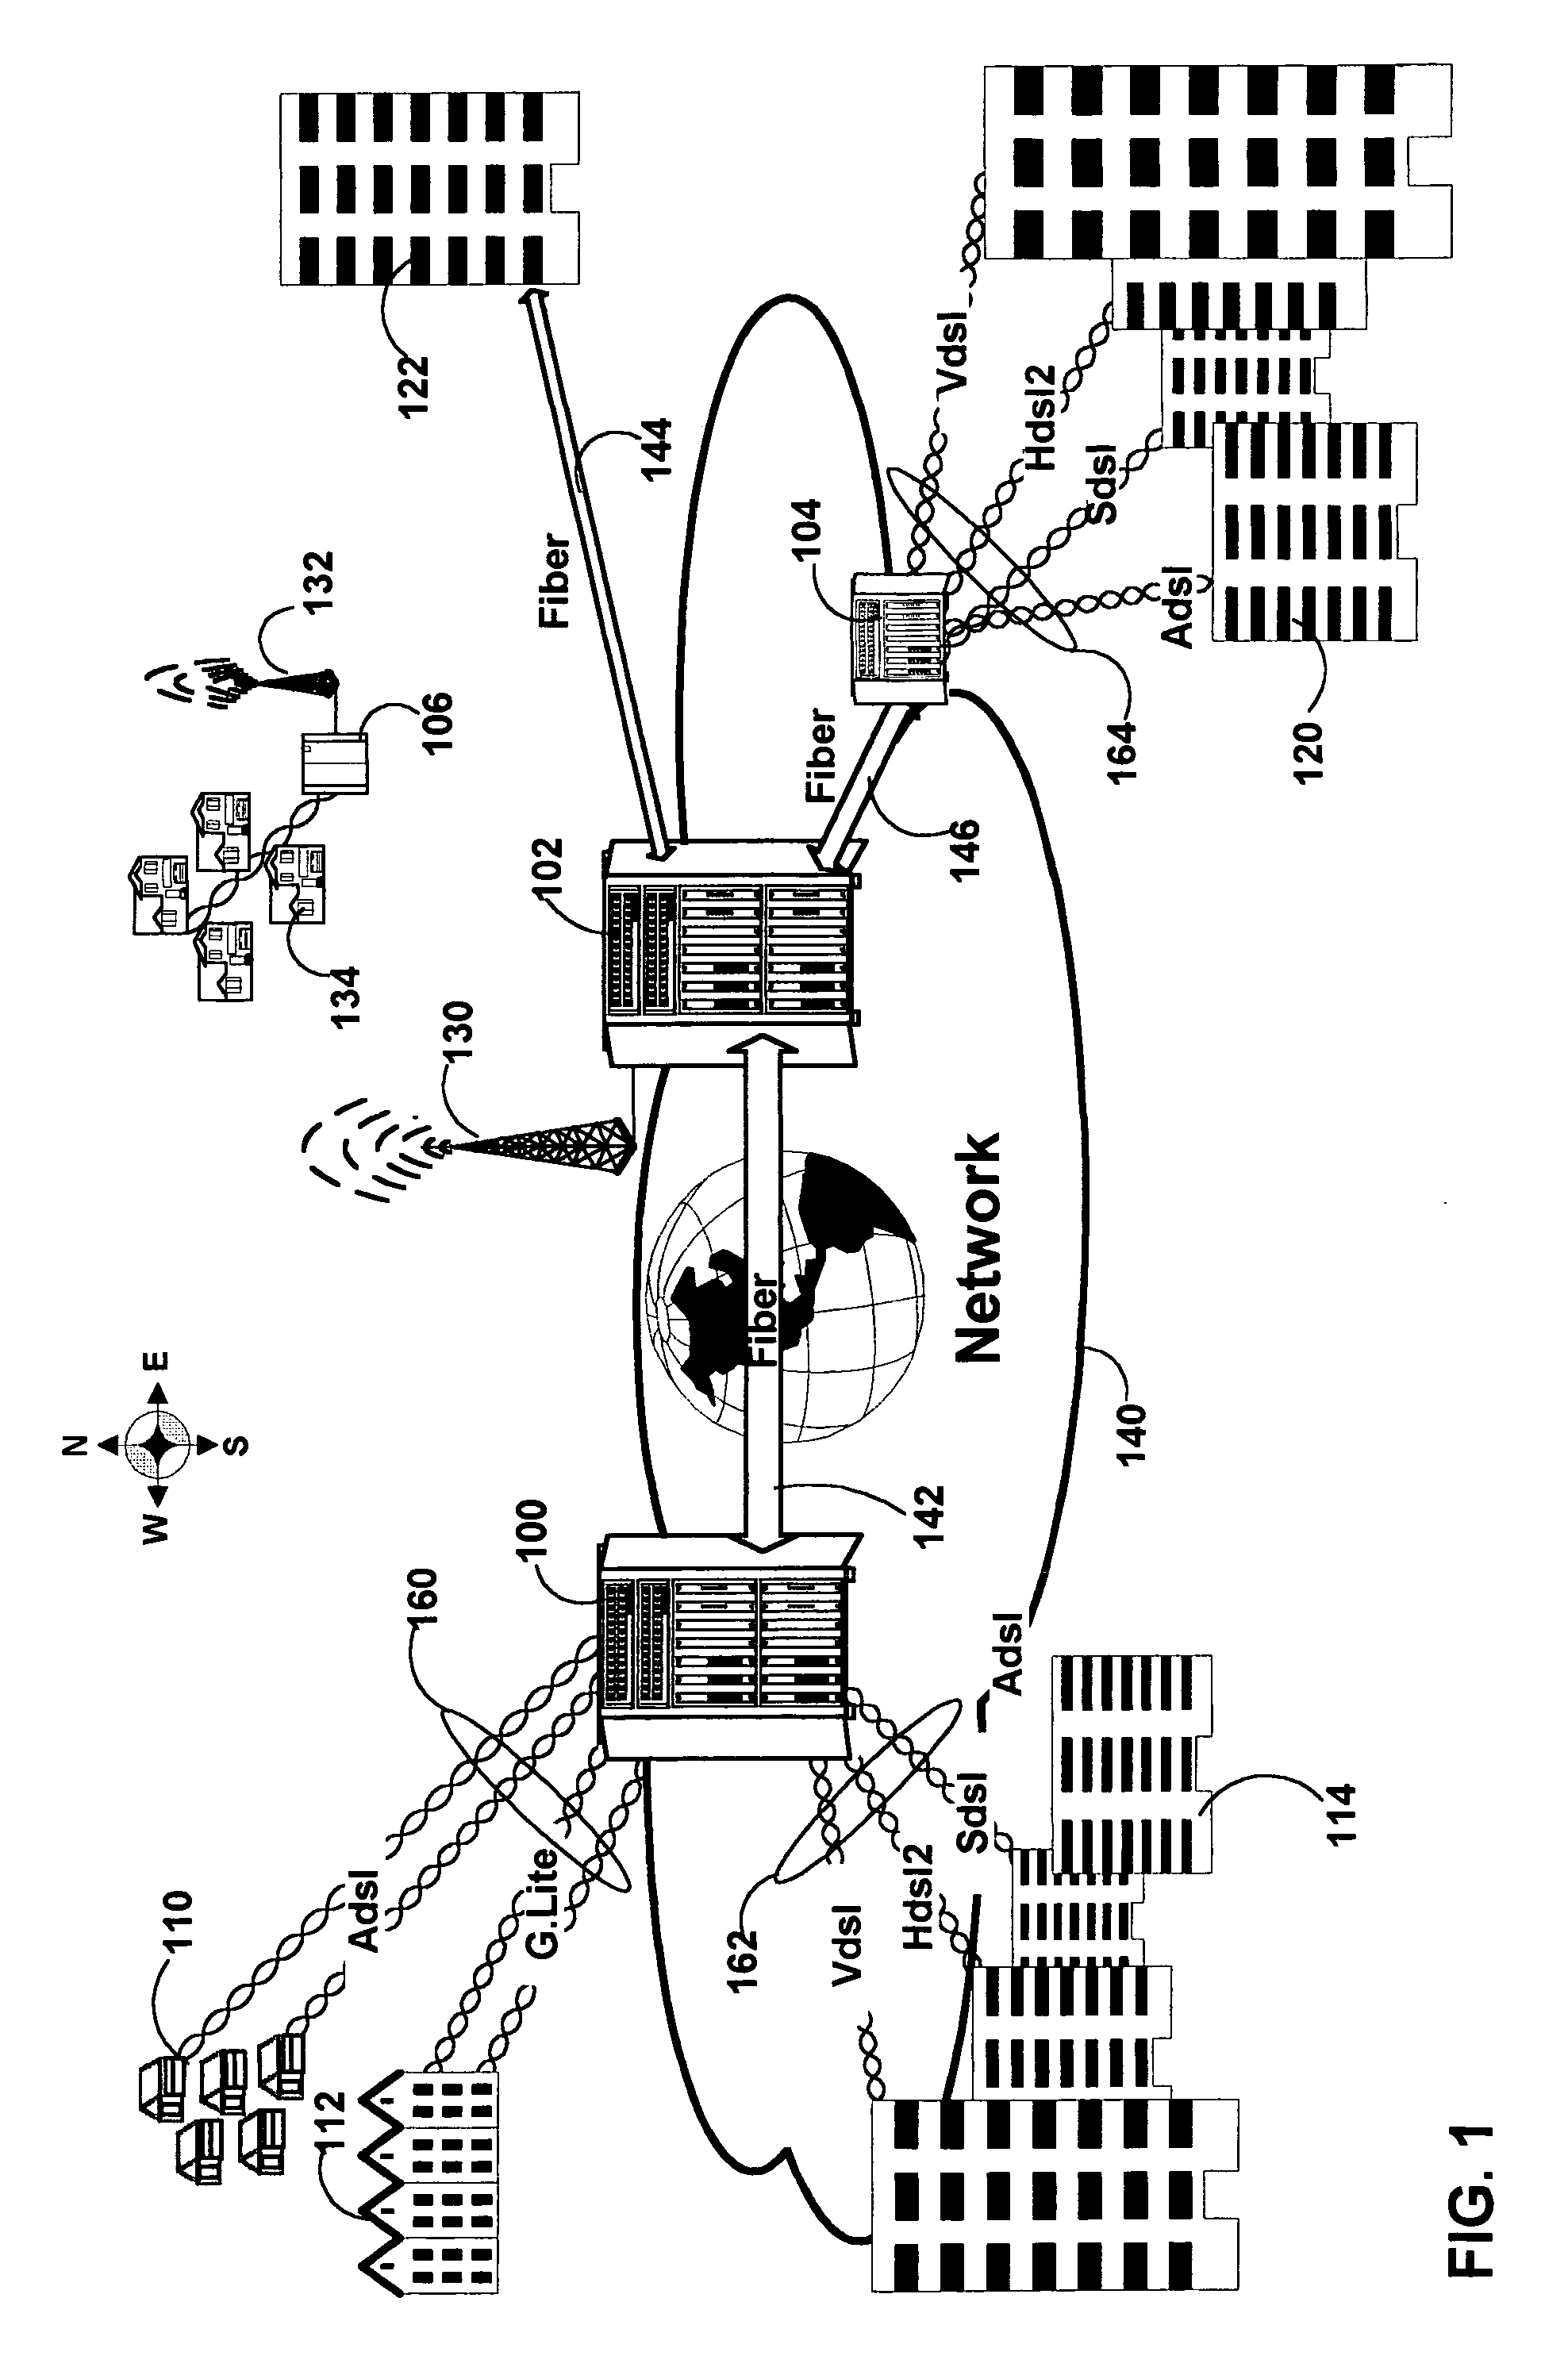 Method and apparatus for an X-DSL modem supporting multiple X-DSL line codes